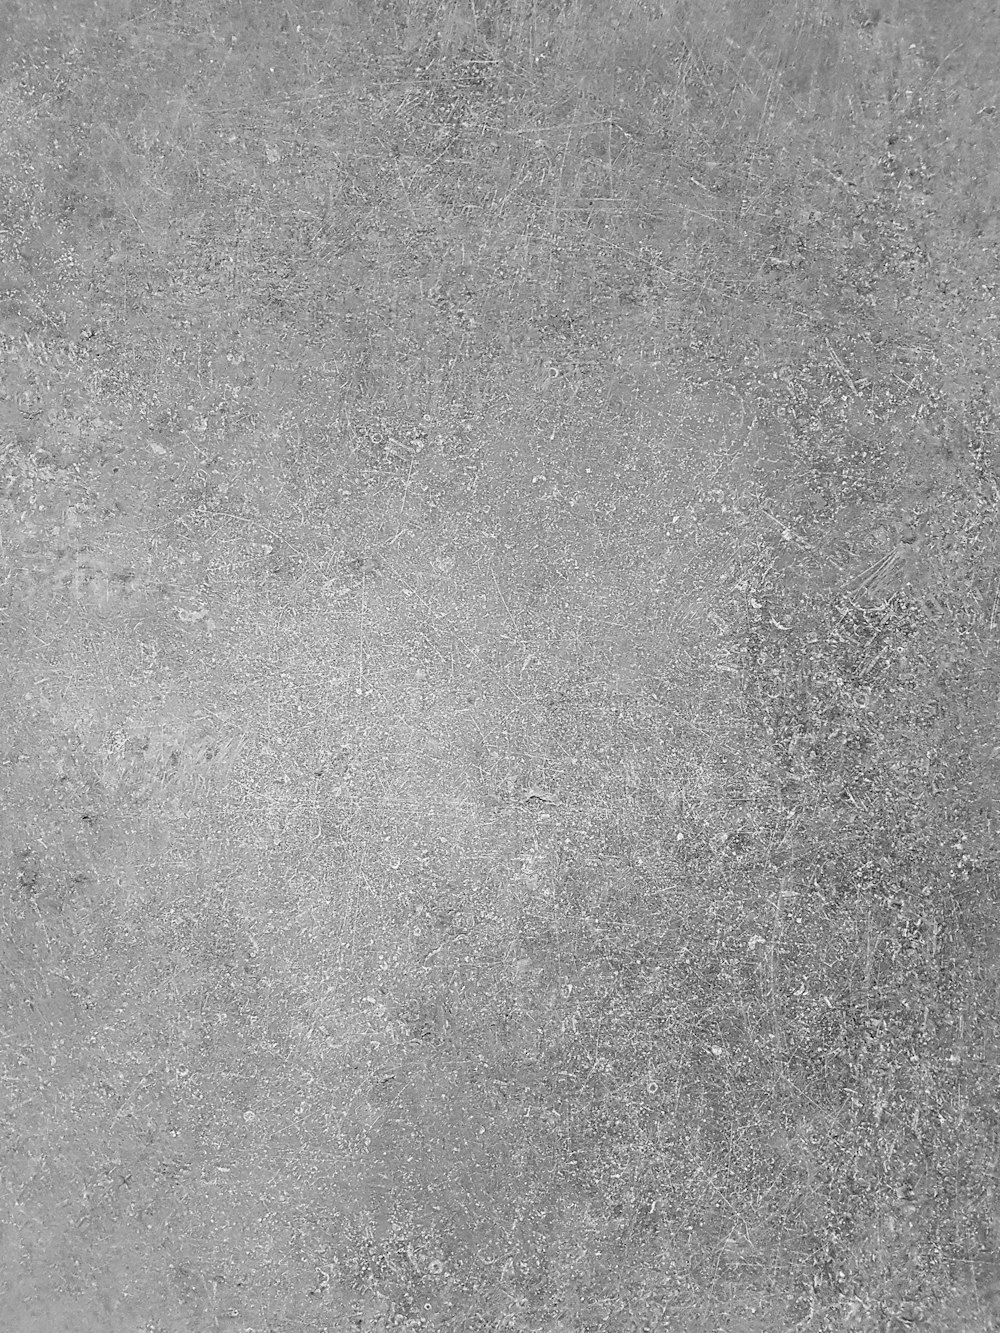 Gray Construction Paper Texture Picture Free Photograph Photos